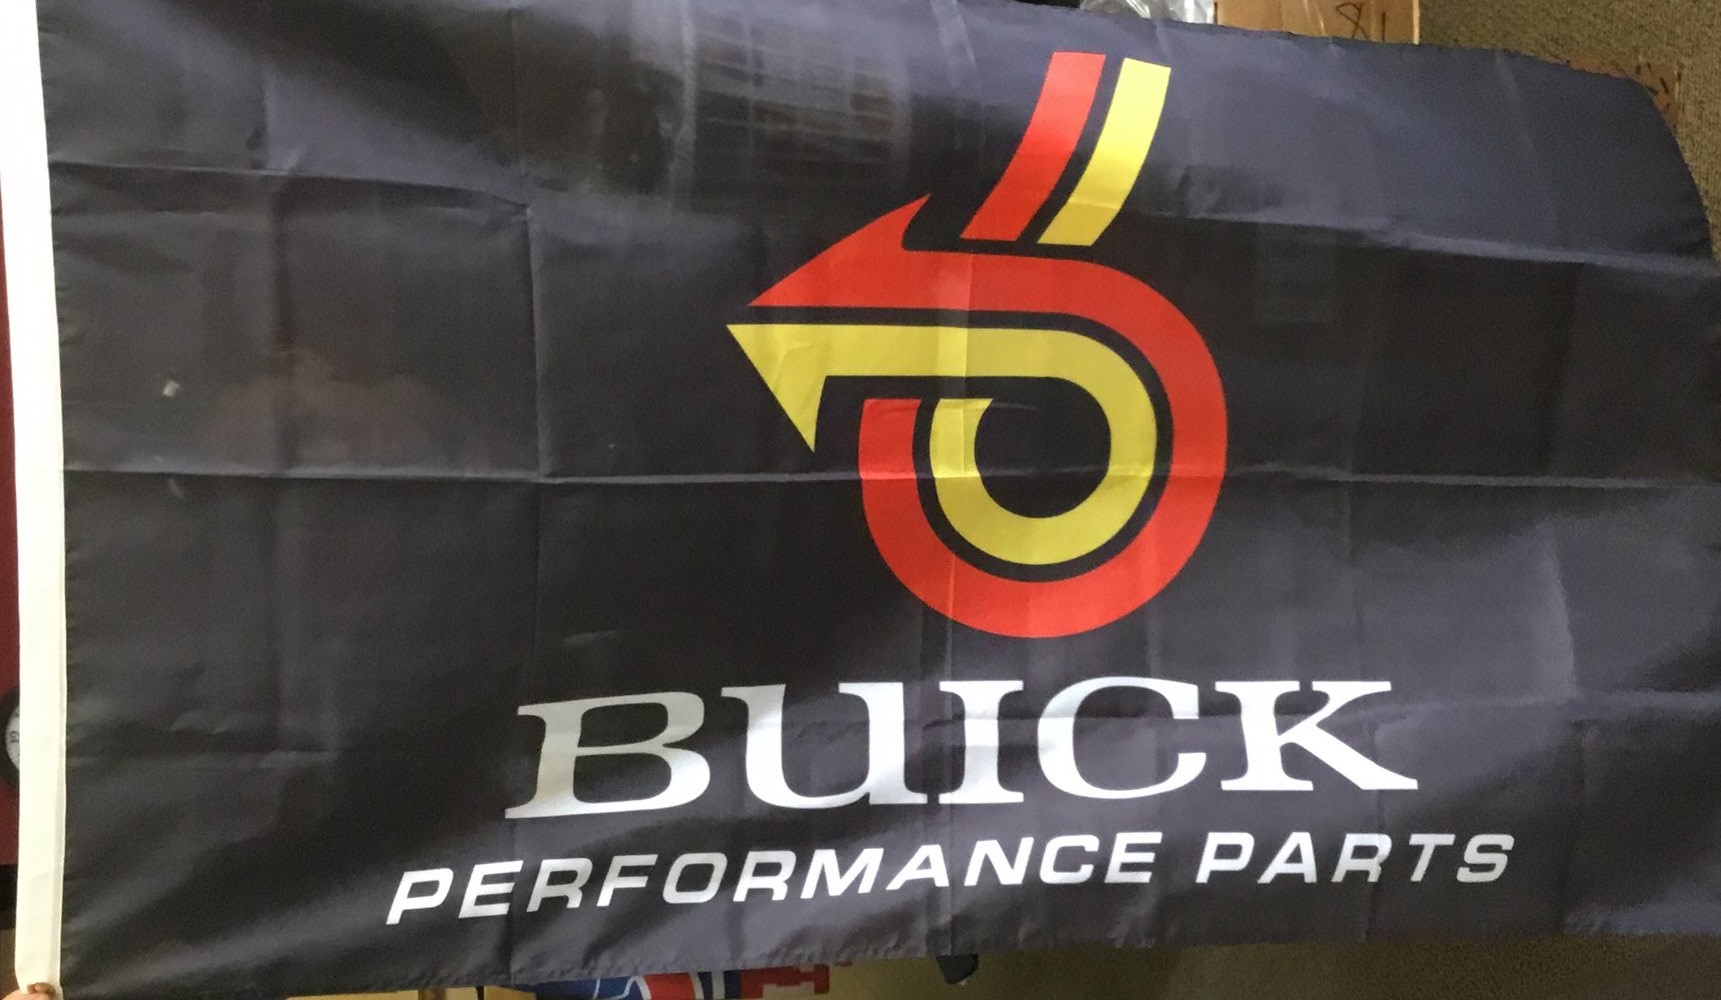 Decorative Turbo Buick Banners